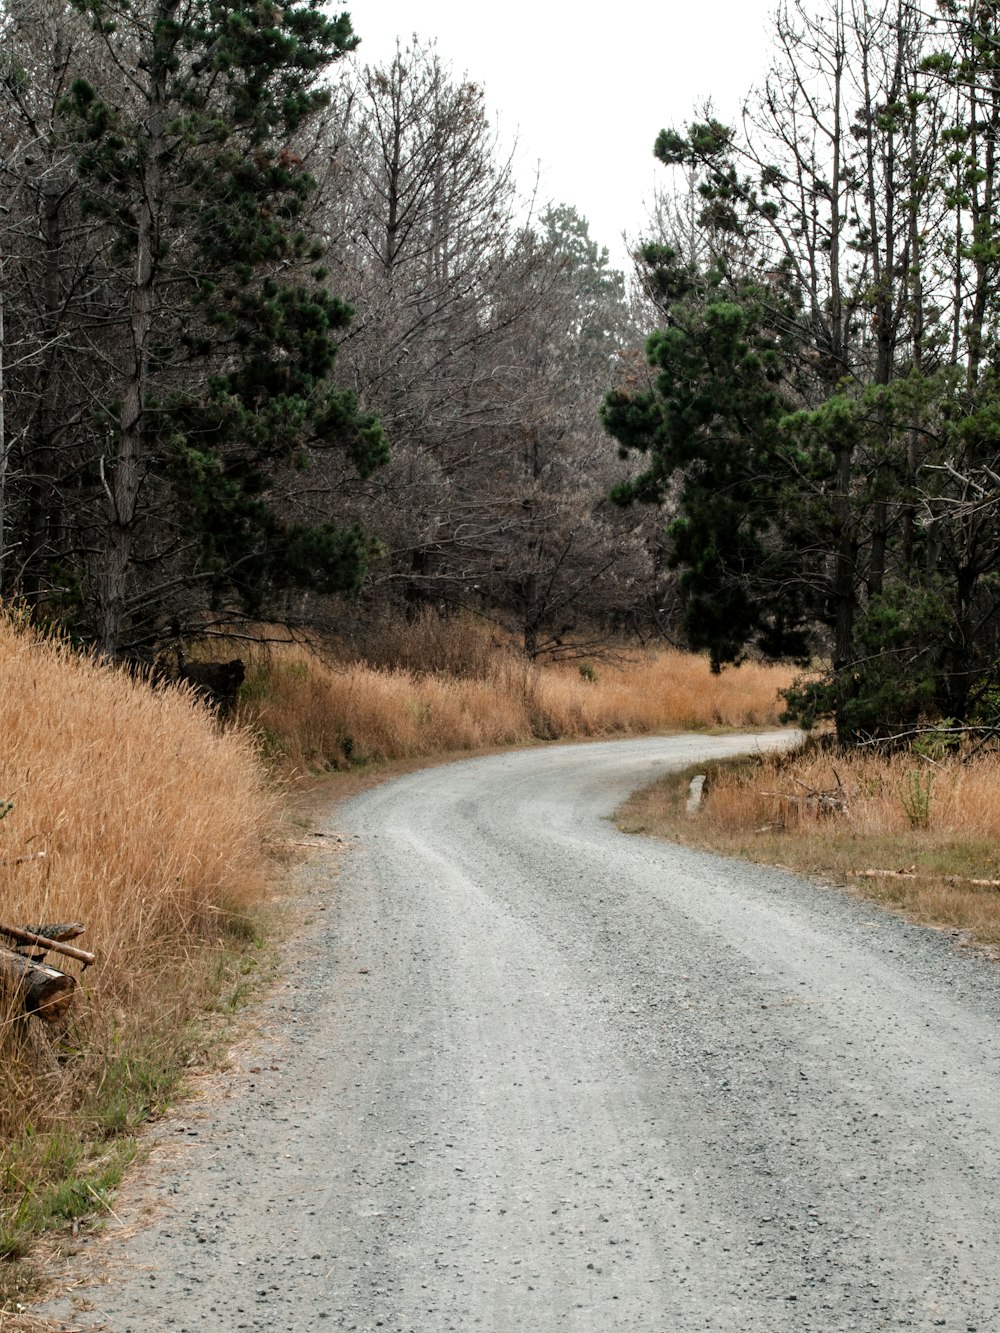 gray concrete road between brown grass and trees during daytime